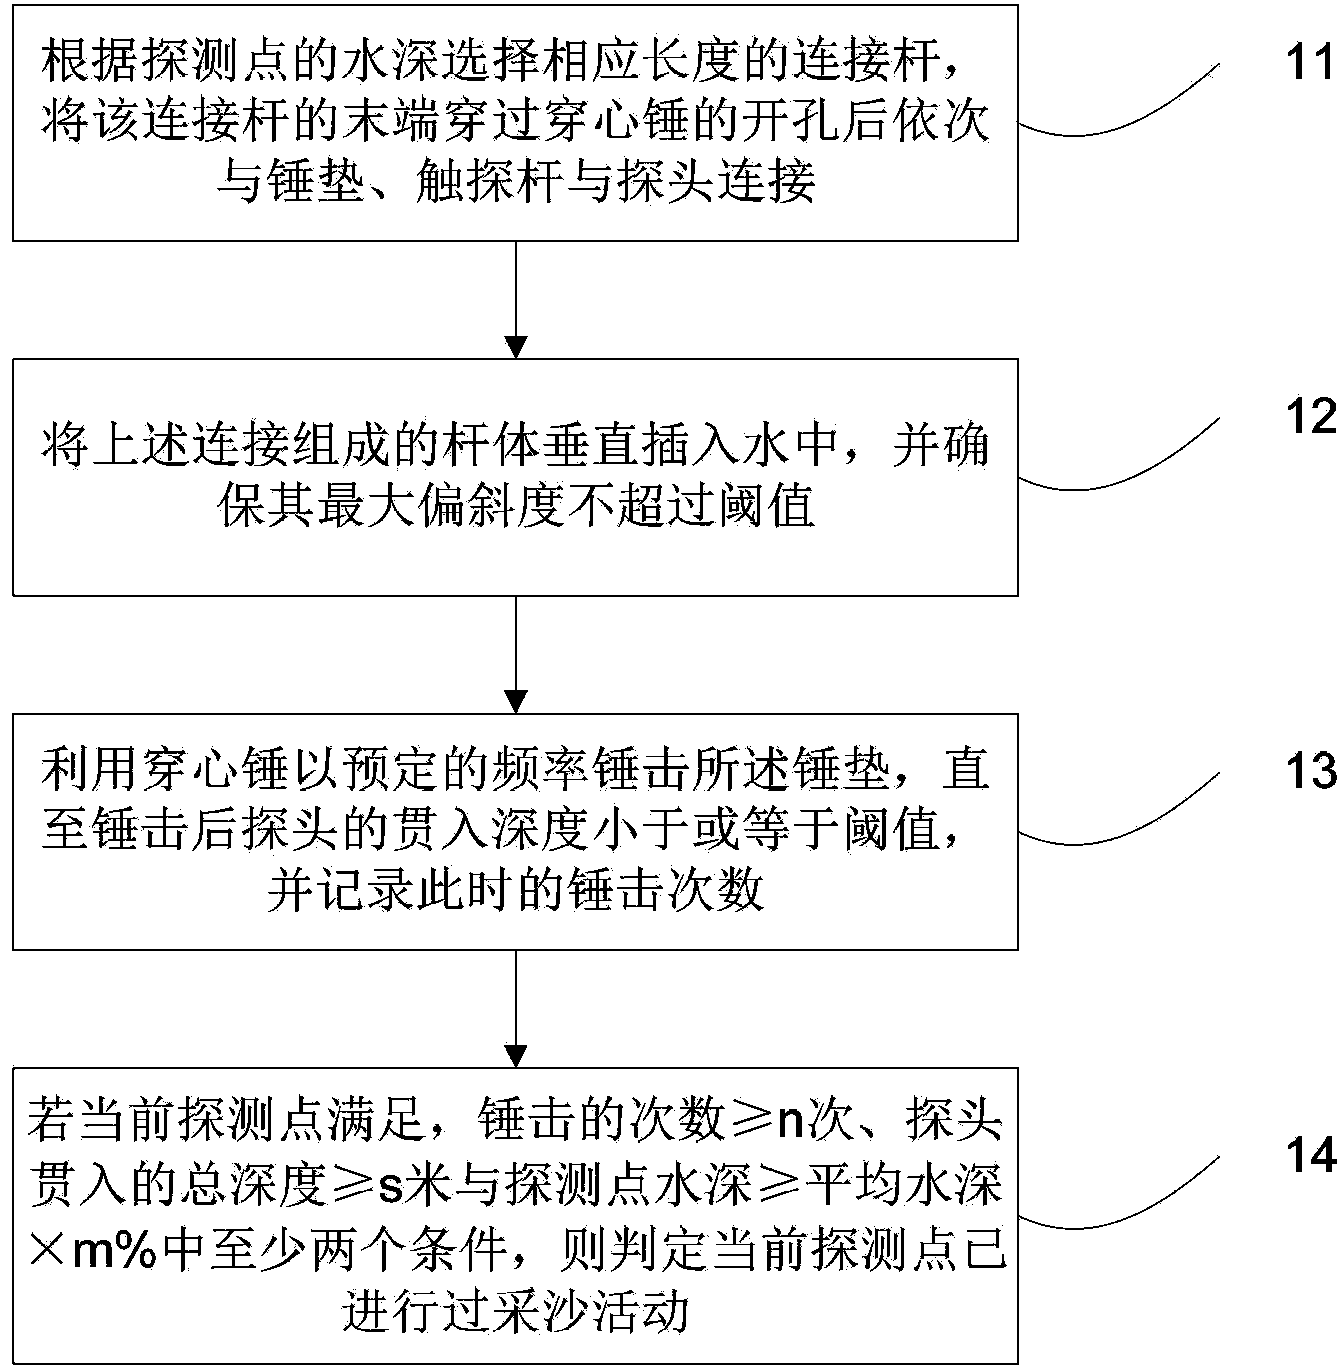 River and lake sand collecting detecting instrument and river and lake sand collecting detection method